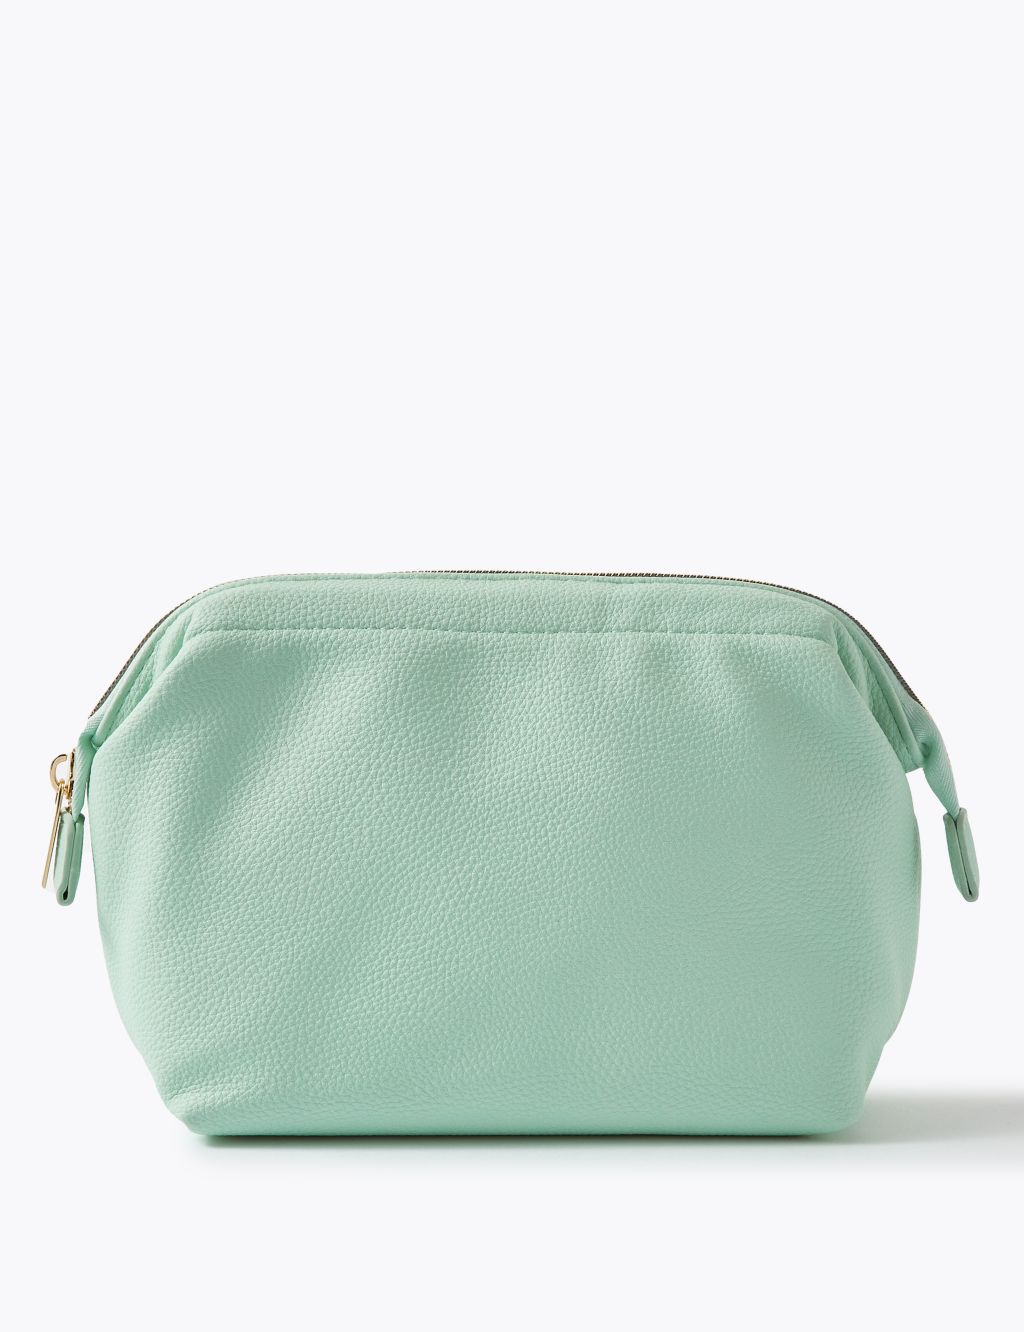 Faux Leather Make-Up Bag | M&S Collection | M&S